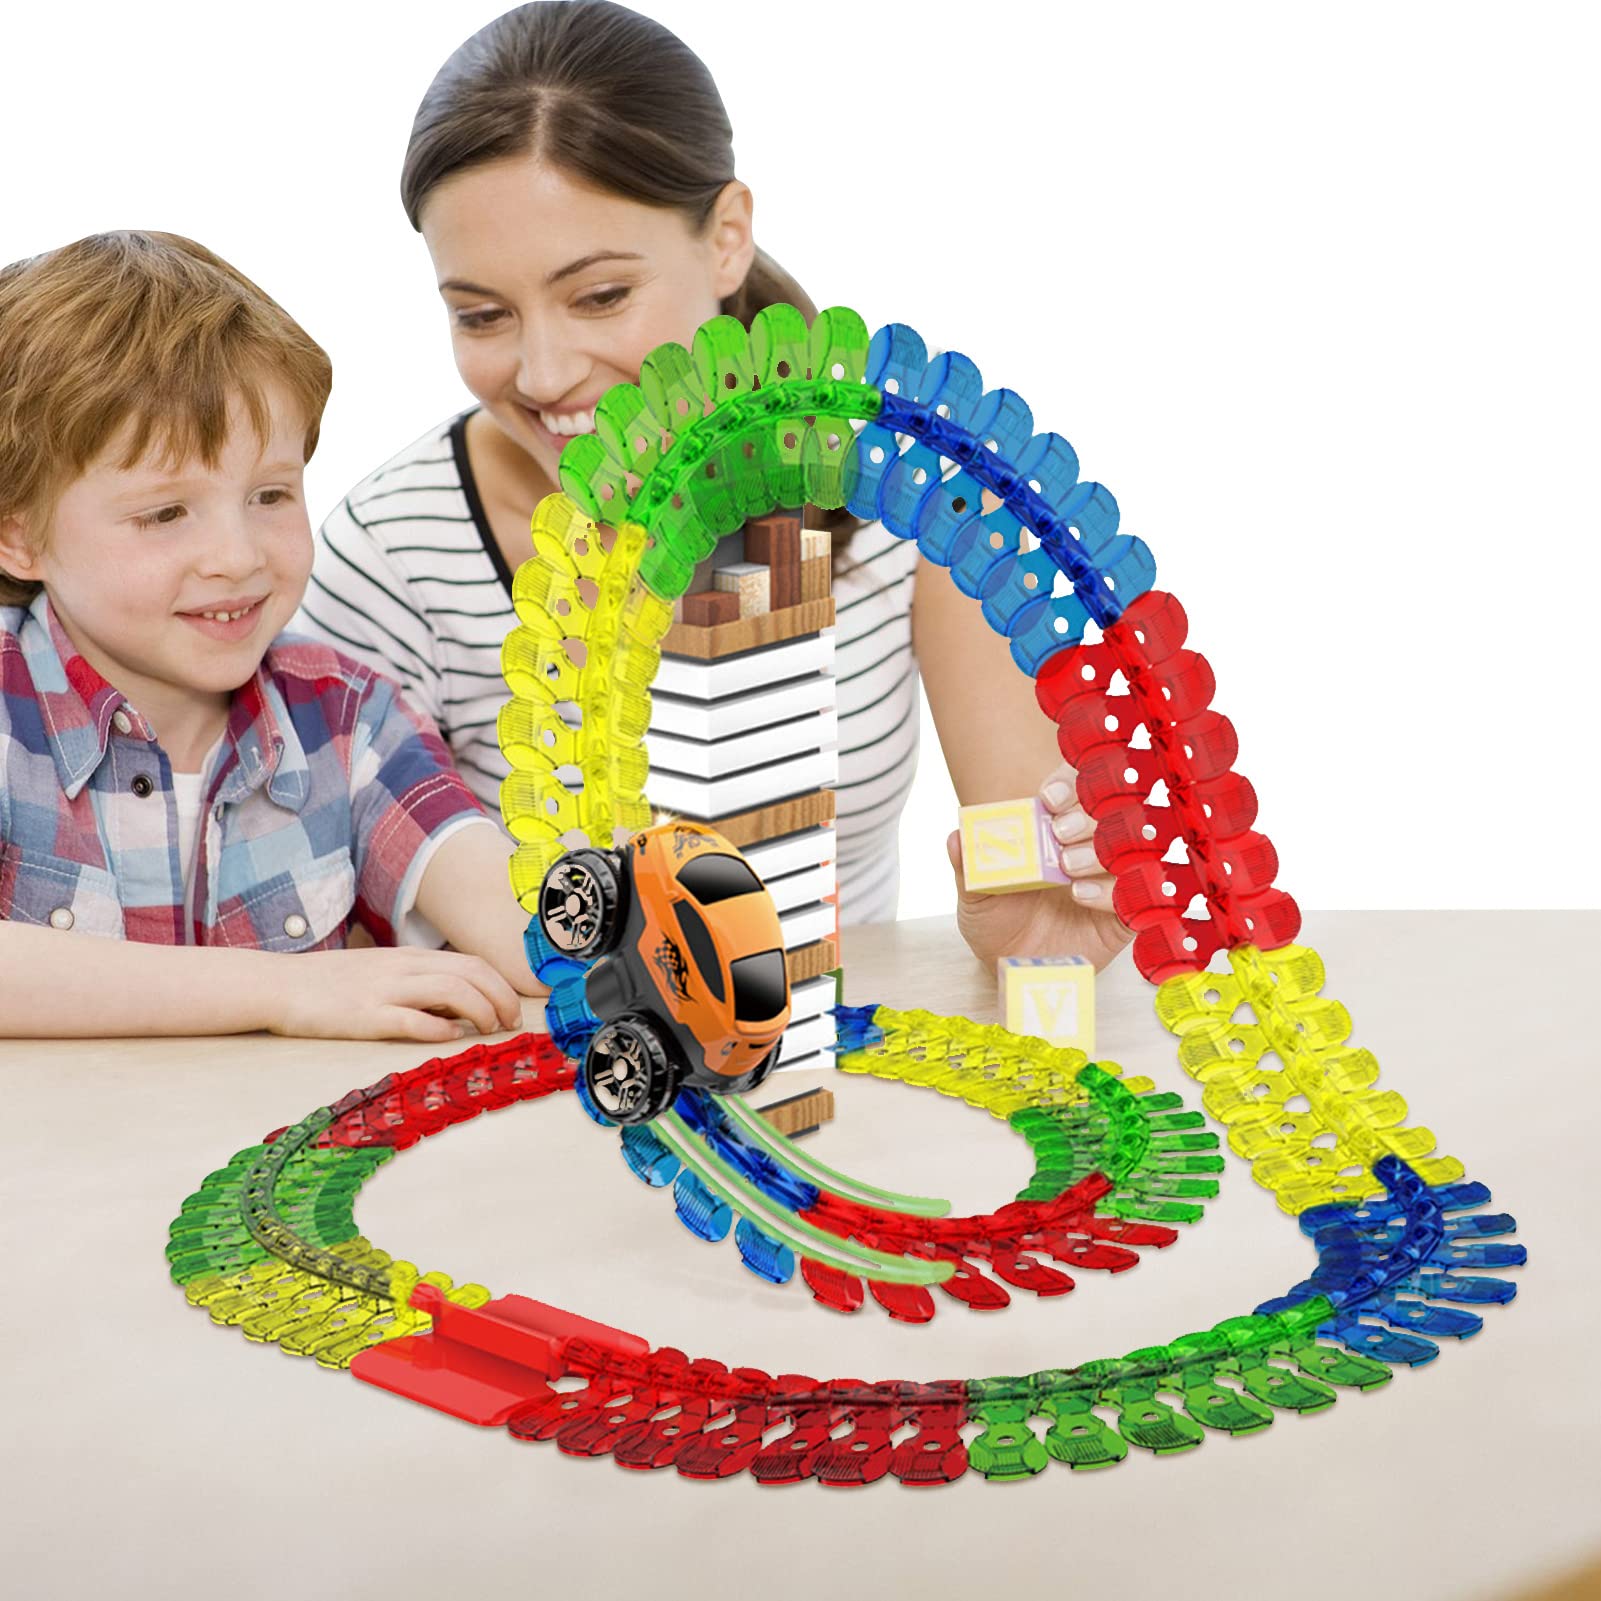 ANTI-GRAVITY PUZZLE ROLLER COASTER TOY